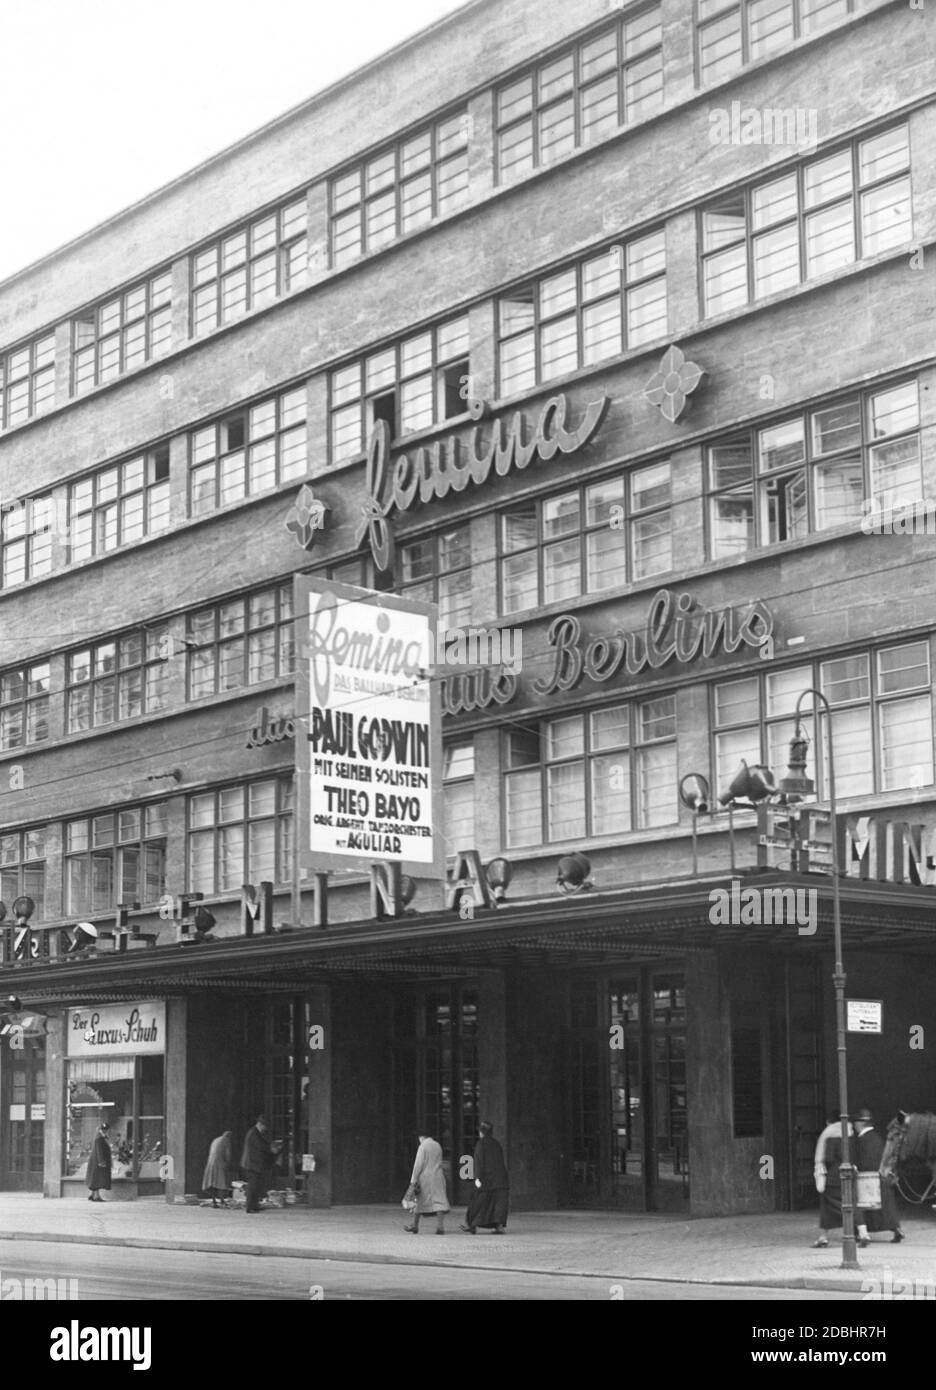 'The Femina-Palast in Nuernberger Strasse 50-56 in Berlin-Schoeneberg in 1932. The building in the New Objectivity (German: Neue Sachlichkeit) style was opened in 1931 and contained offices, a ballroom and numerous entertainment facilities and called itself ''The Ballhouse of Berlin''. At the entrance a woman stands in front of the window of the shoe store ''Der Luxus-Schuh''. A poster advertises: ''Femina / The Ballhouse of Berlin / Paul Godwin / with his soloists / Theo Bayo ...''.' Stock Photo